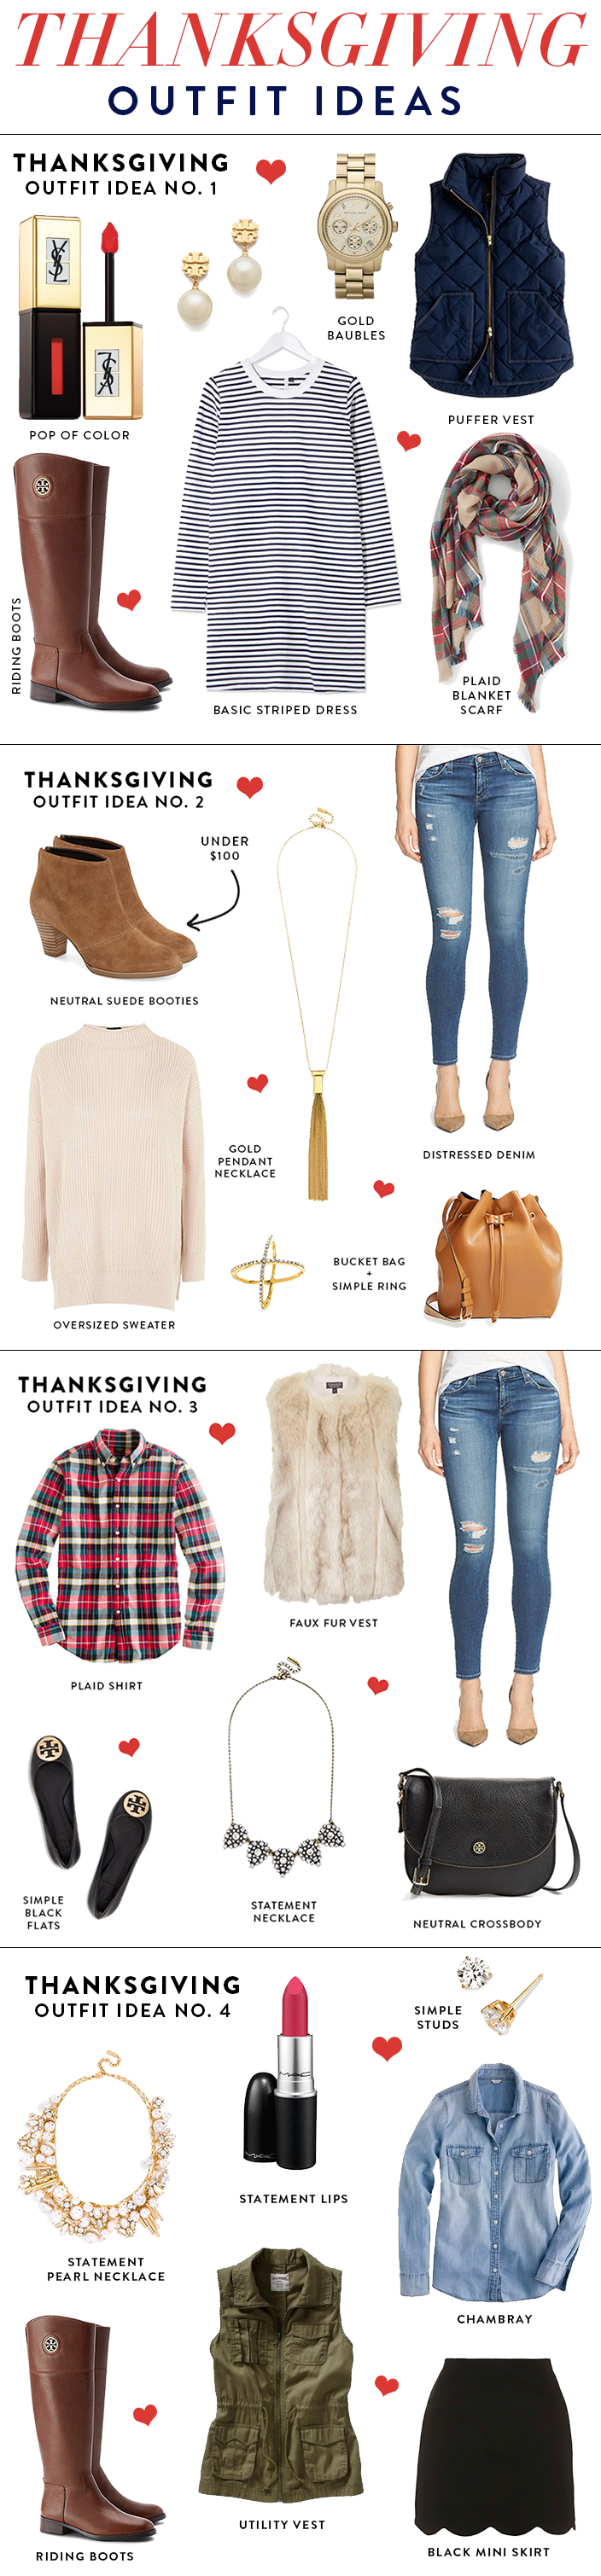 Thanksgiving Outfit Ideas for every occasion